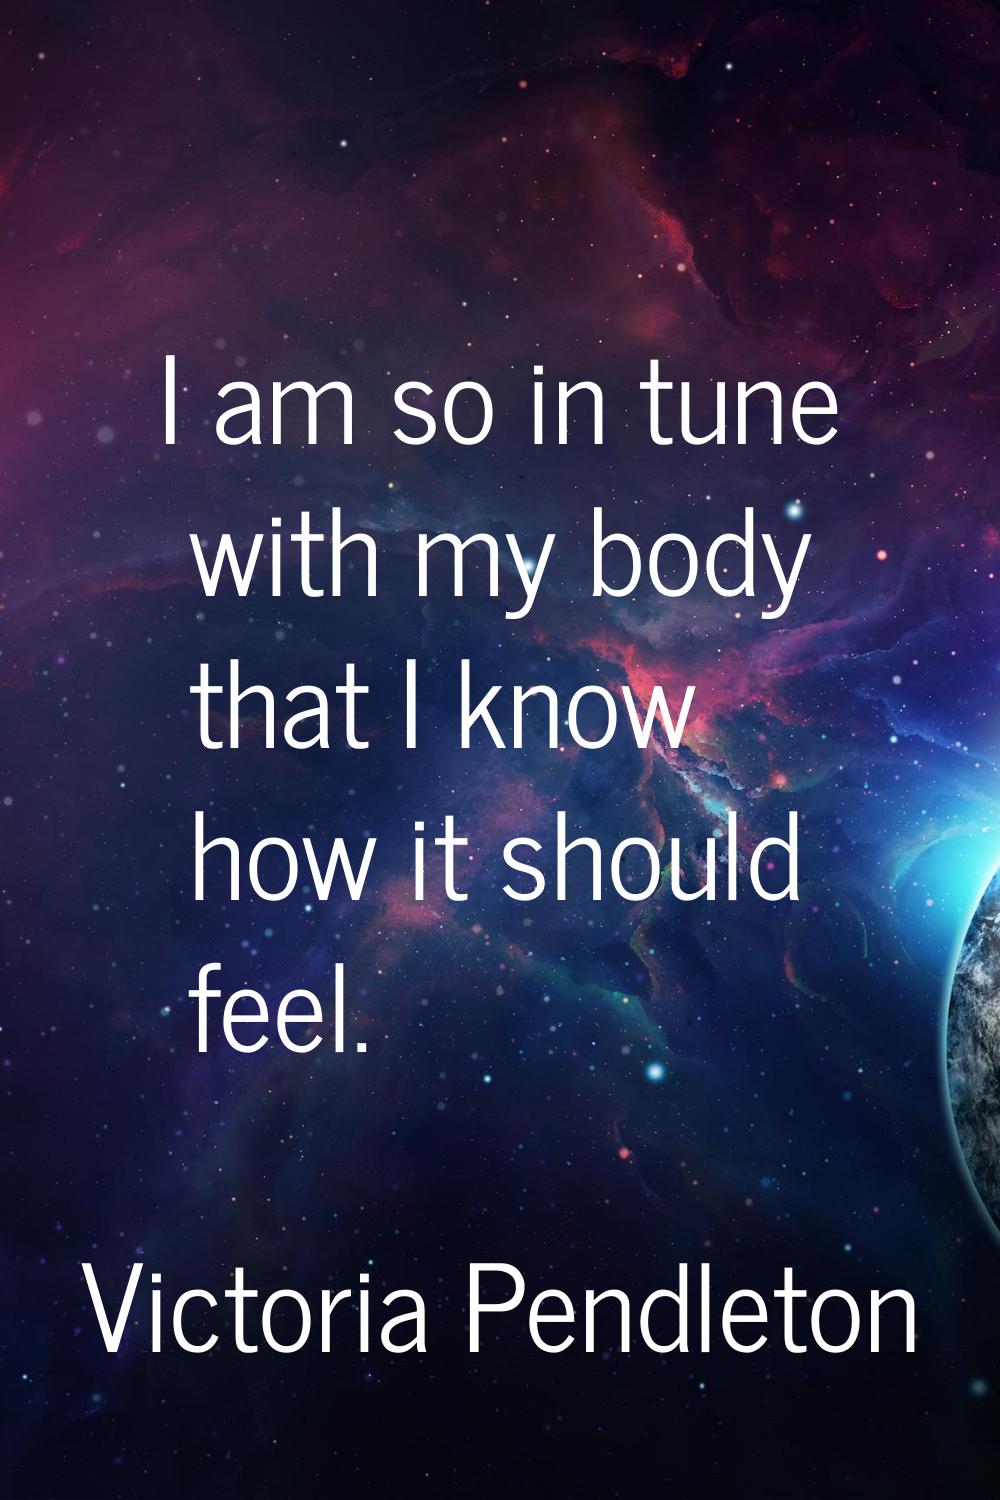 I am so in tune with my body that I know how it should feel.